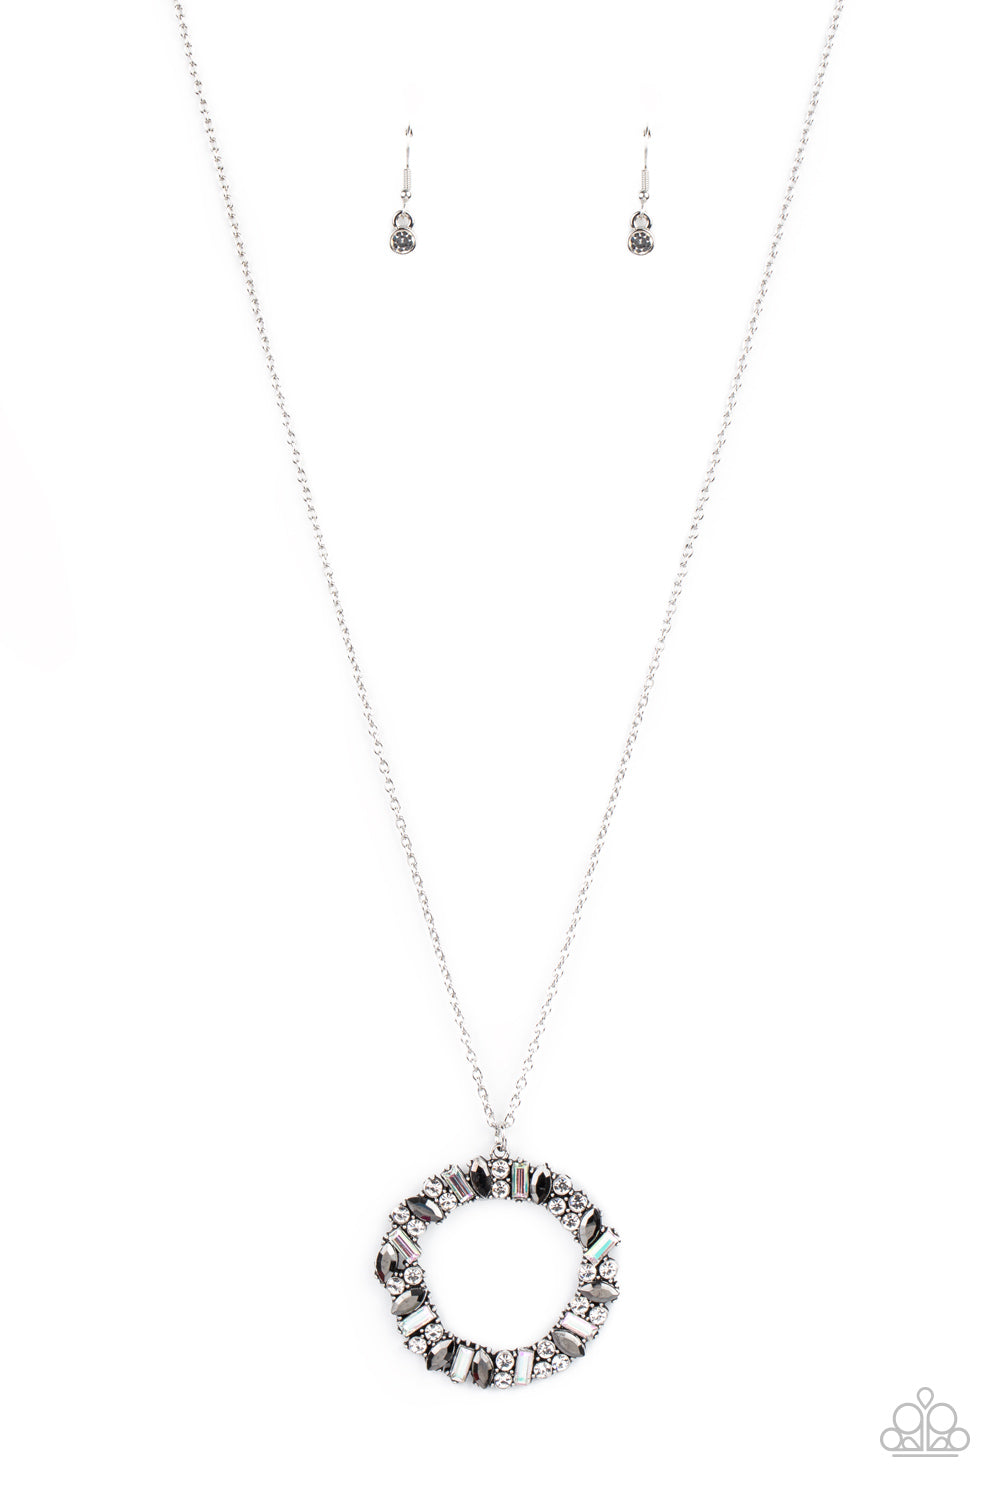 Wreathed In Wealth Silver Necklace